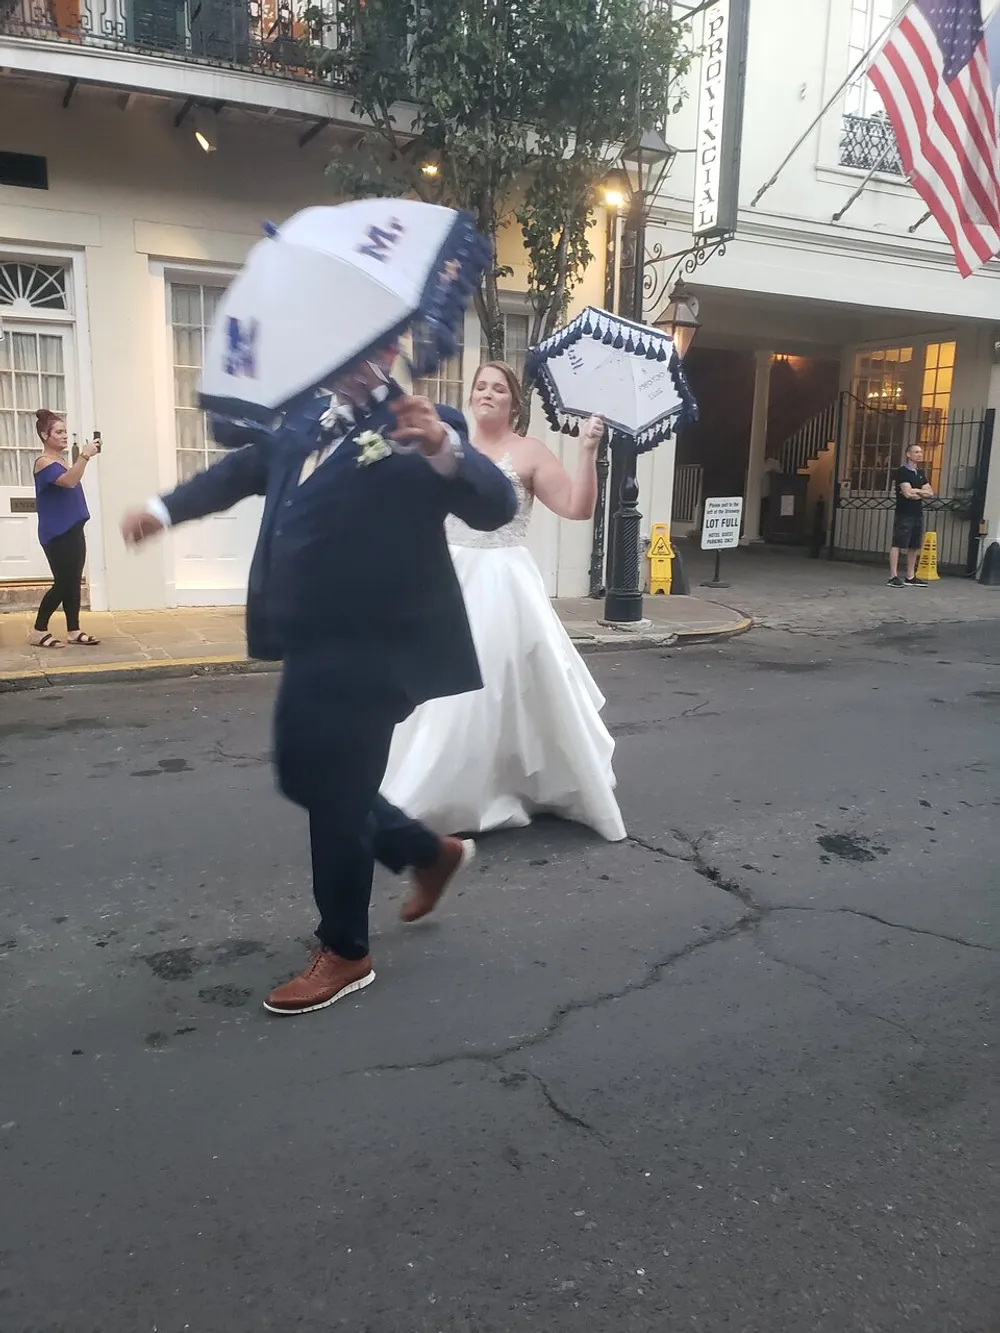 A joyful bride and groom are participating in a lively second line parade a traditional New Orleans celebratory procession with umbrellas in hand